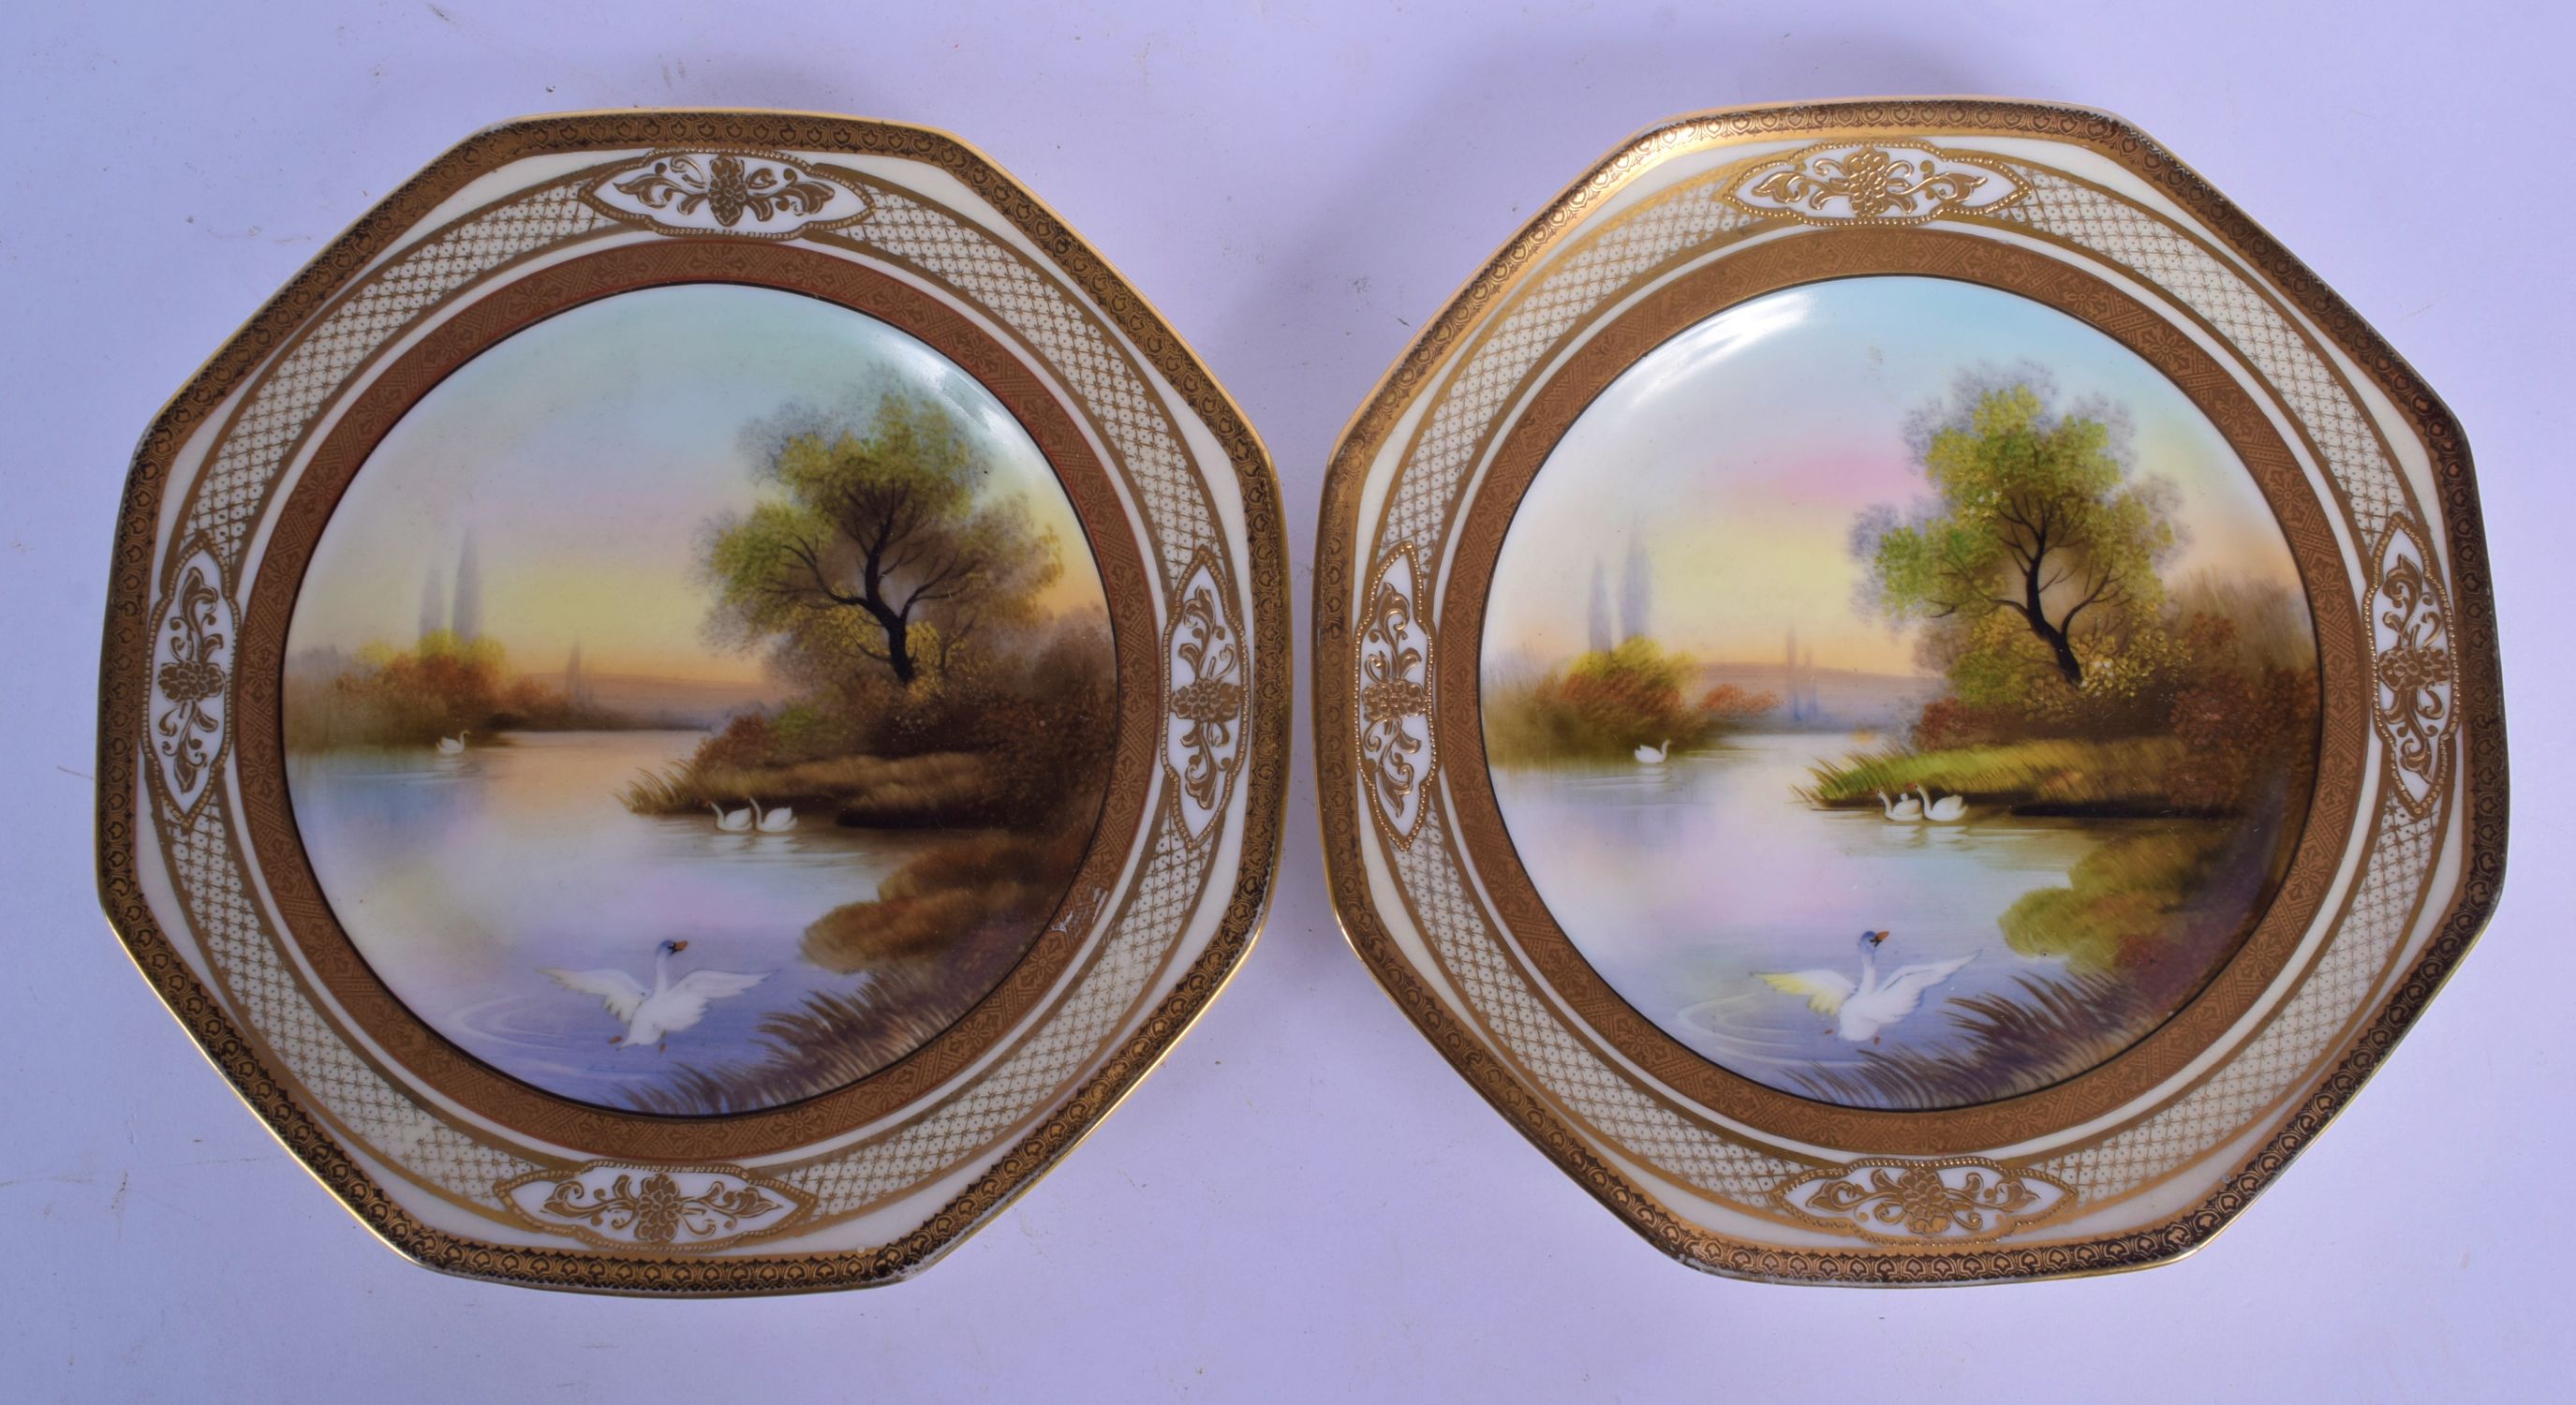 A PAIR OF JAPANESE TAISHO PERIOD NORITAKE PORCELAIN PLATES painted with ducks upon a lake. 20.5 cm w